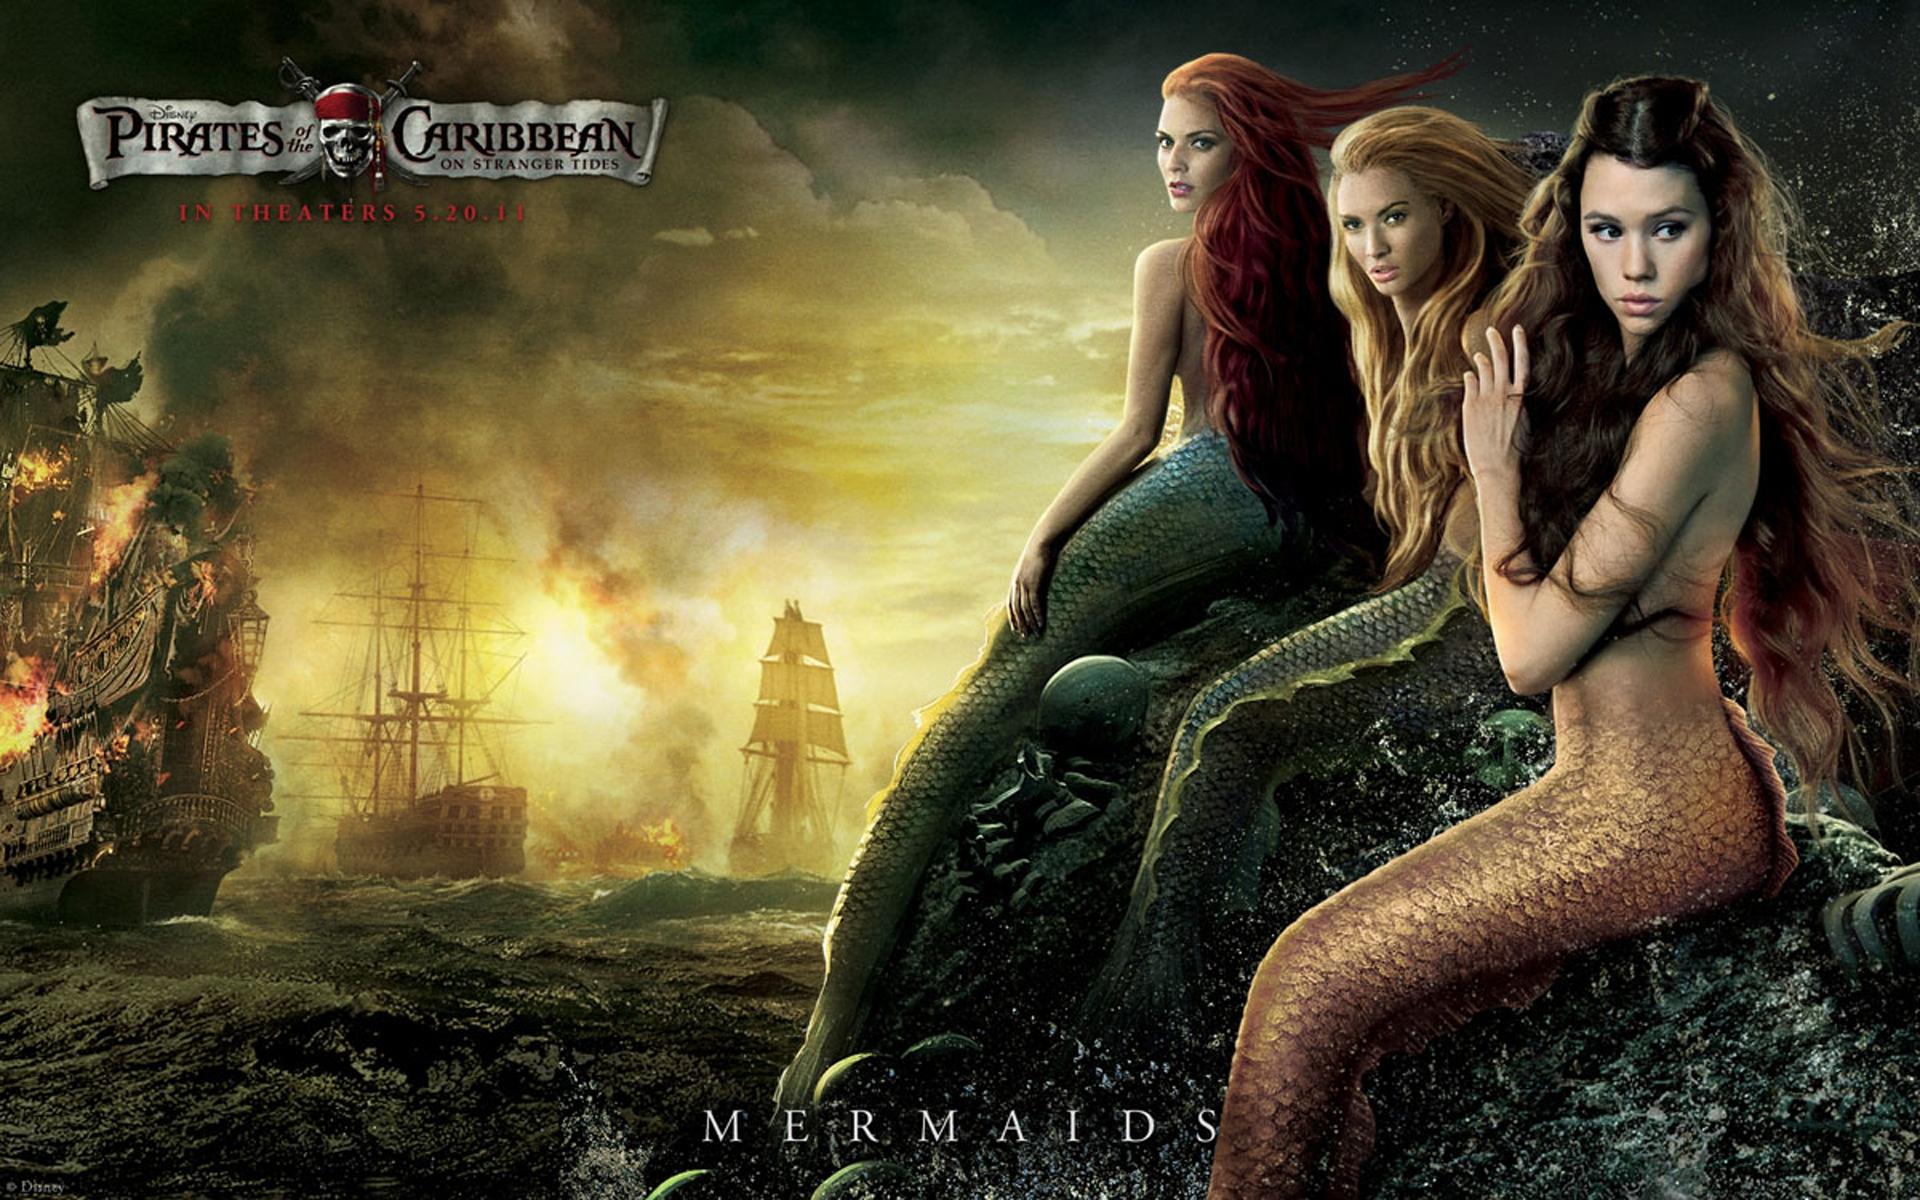 Talk Like A Pirate Day Brings News Of Additions Mermaids To The